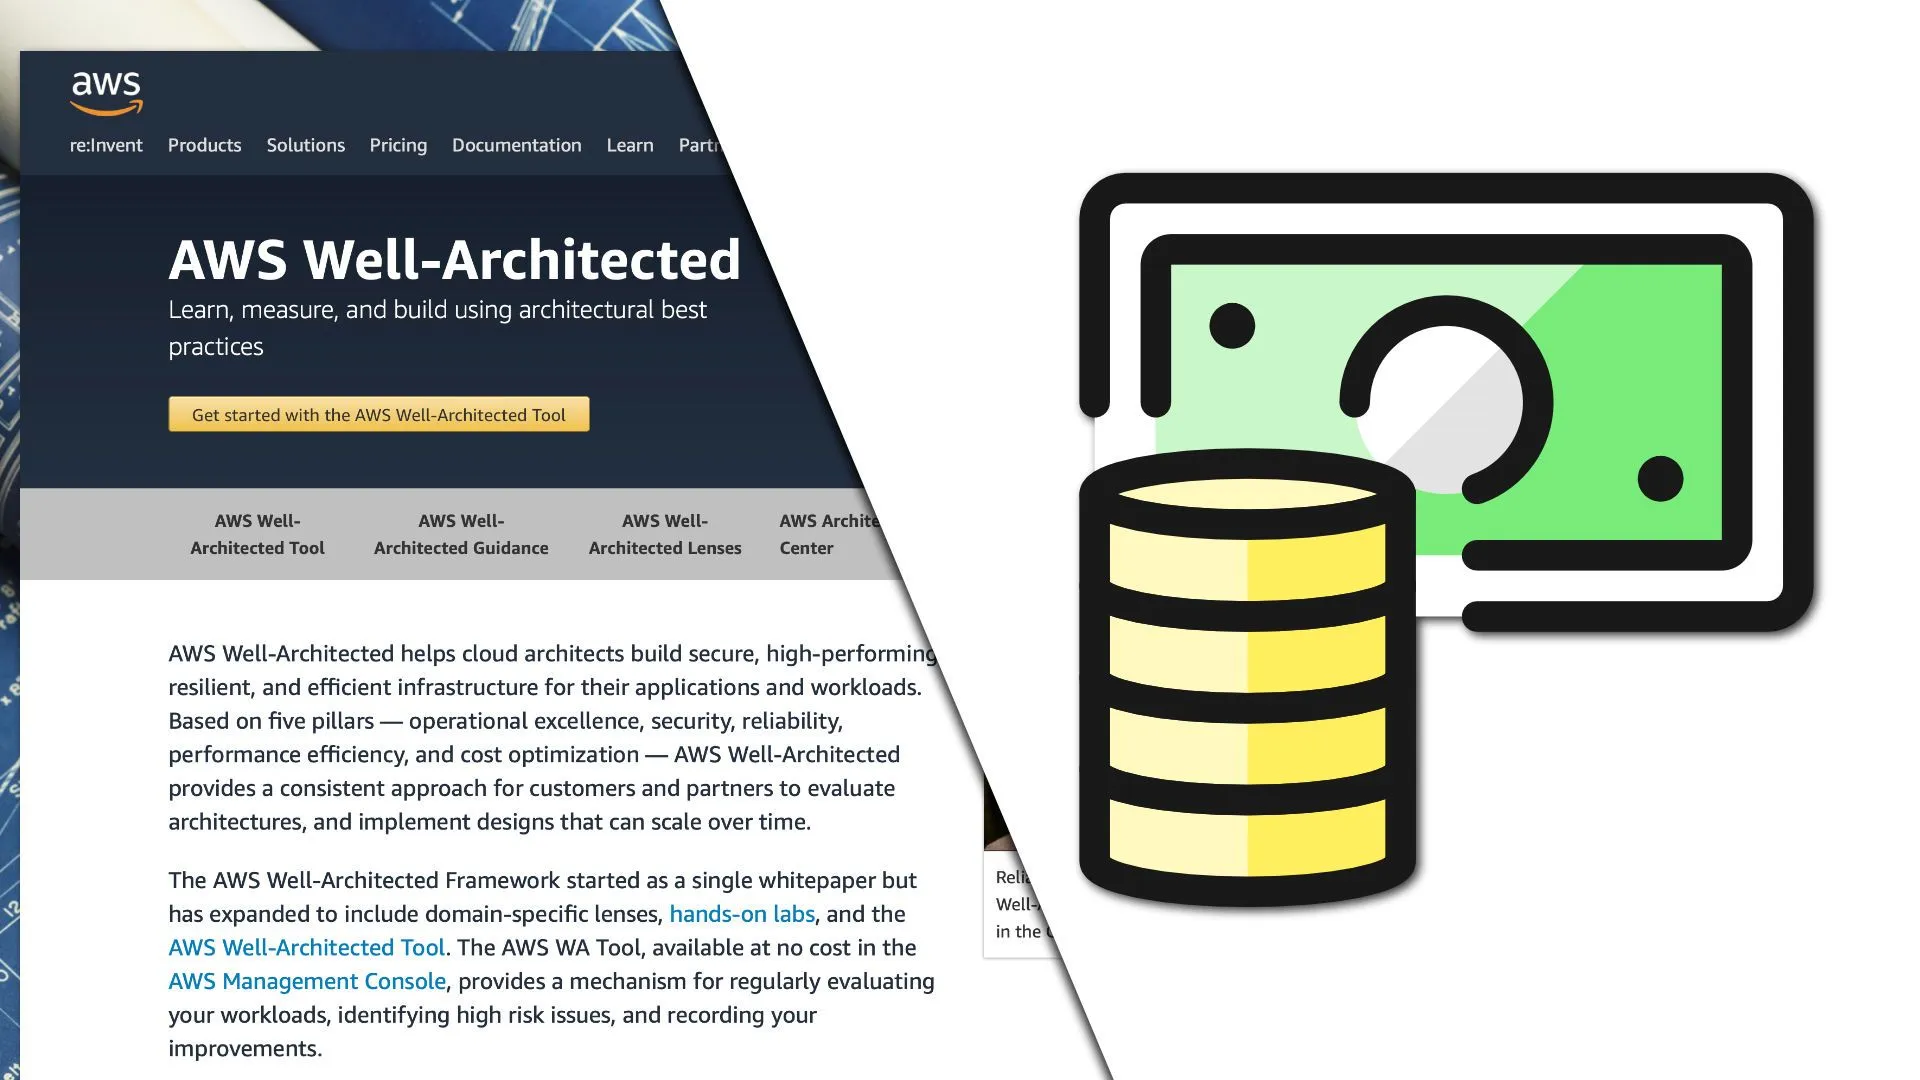 Cost Optimization in the AWS Well-Architected Framework